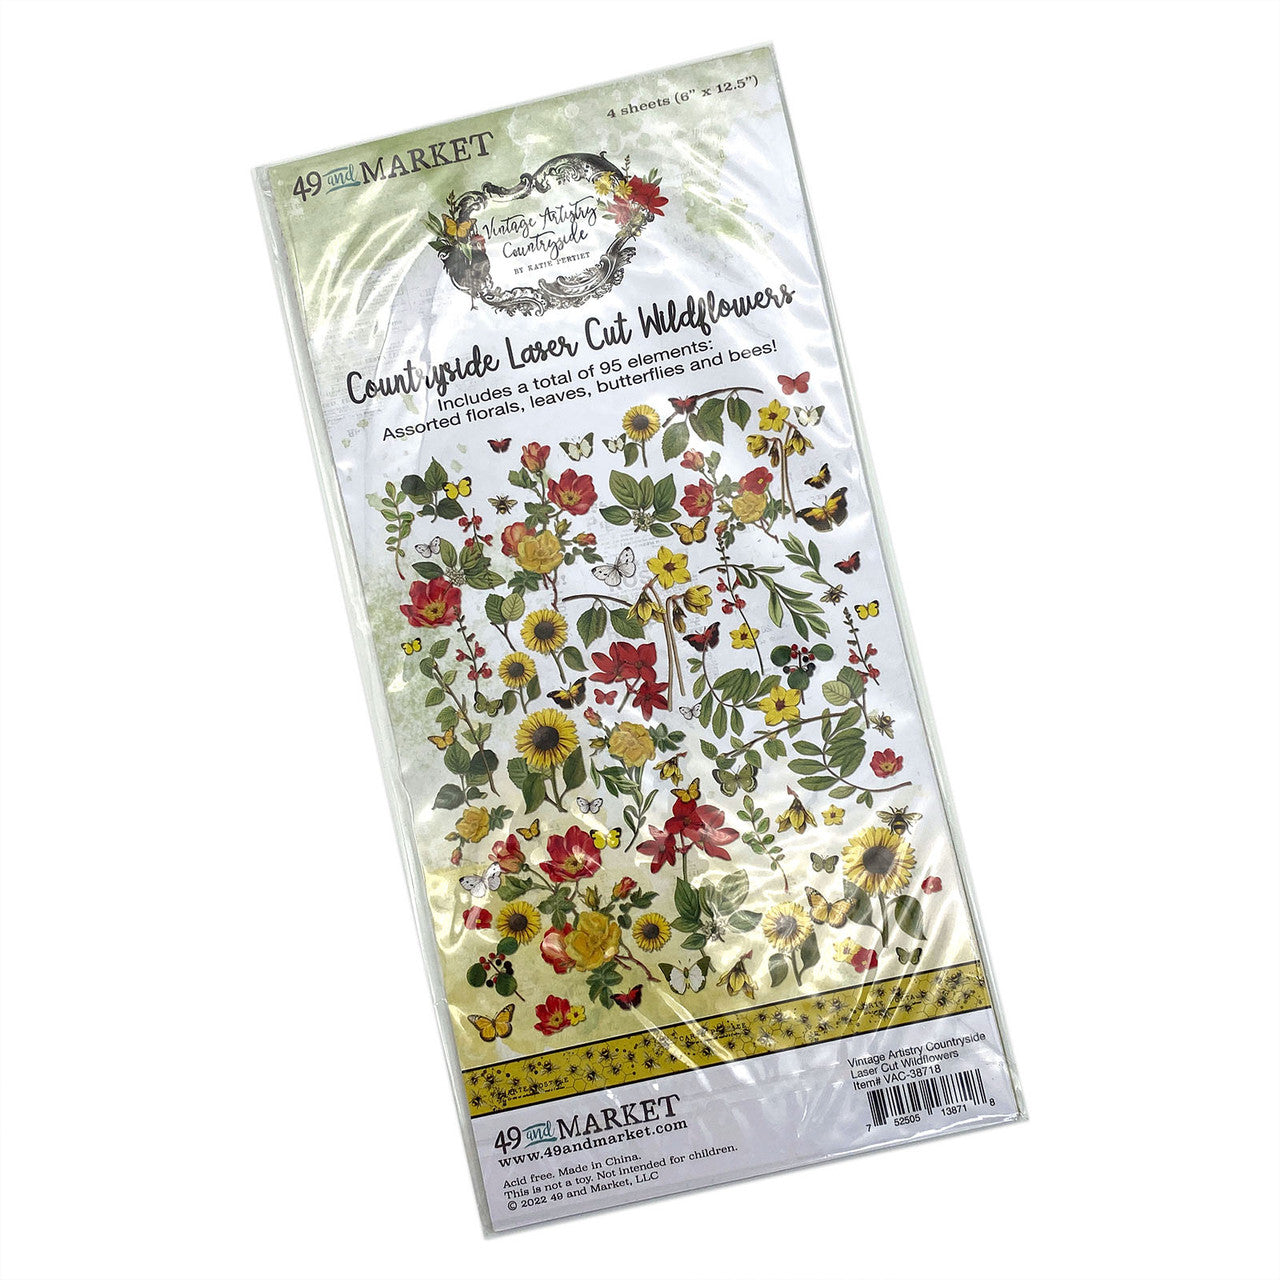 49 and Market Vintage Artistry Countryside Laser Cut Wildflowers